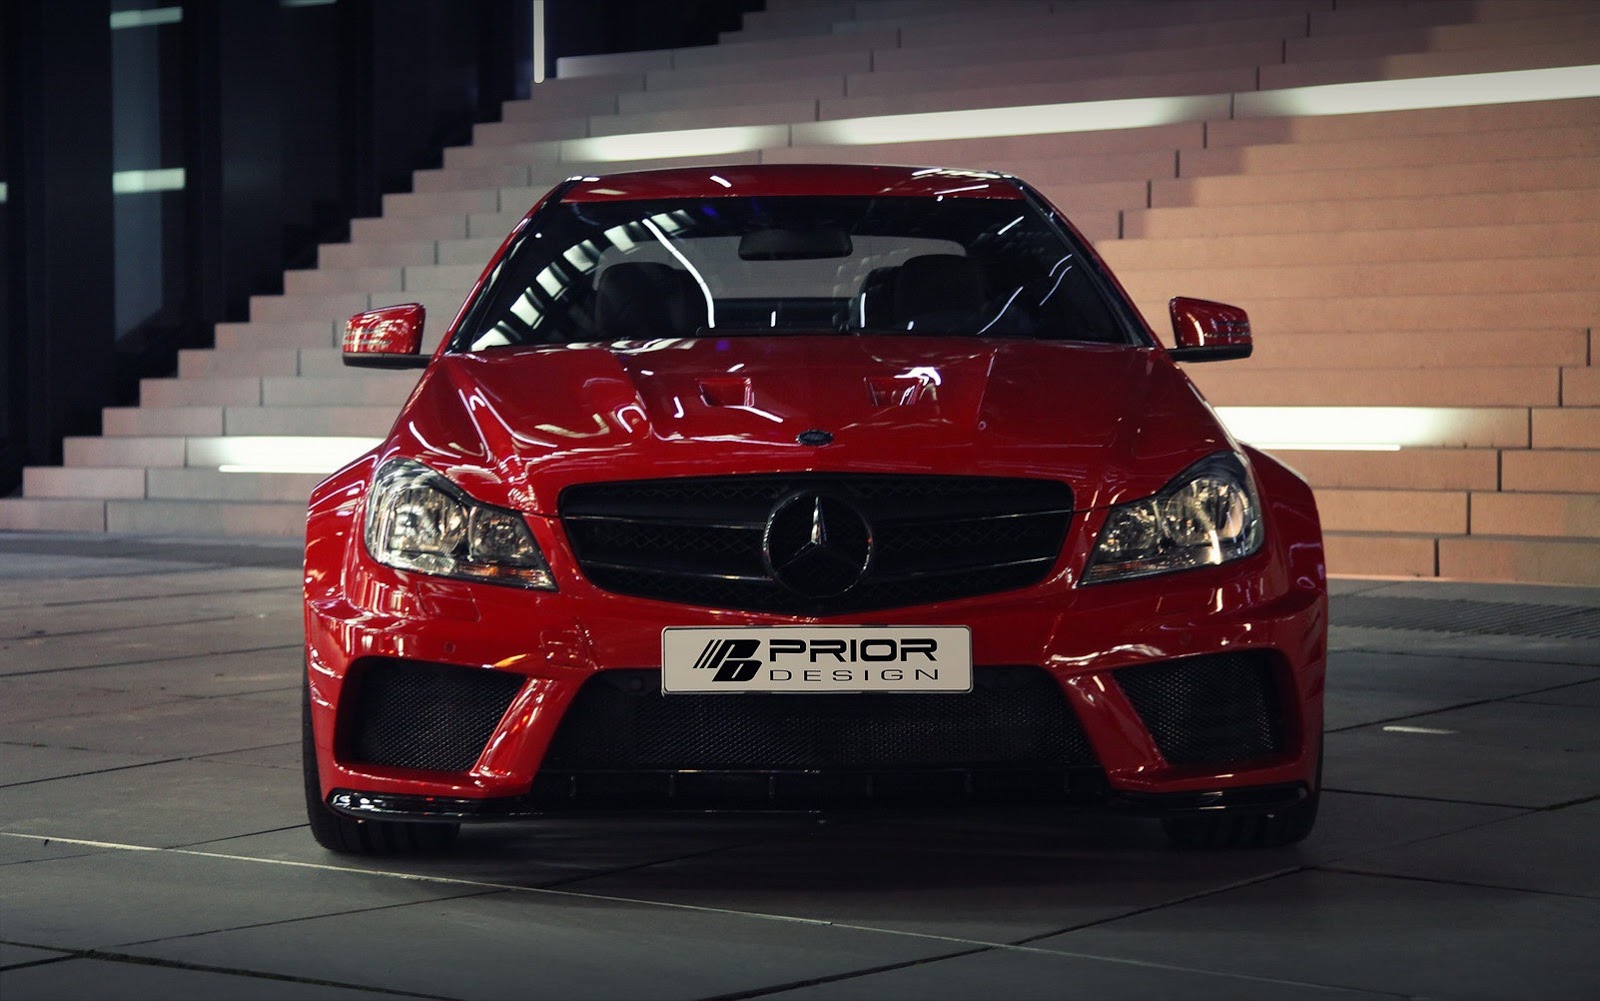 Mercedes C-Class Coupe by Prior Design